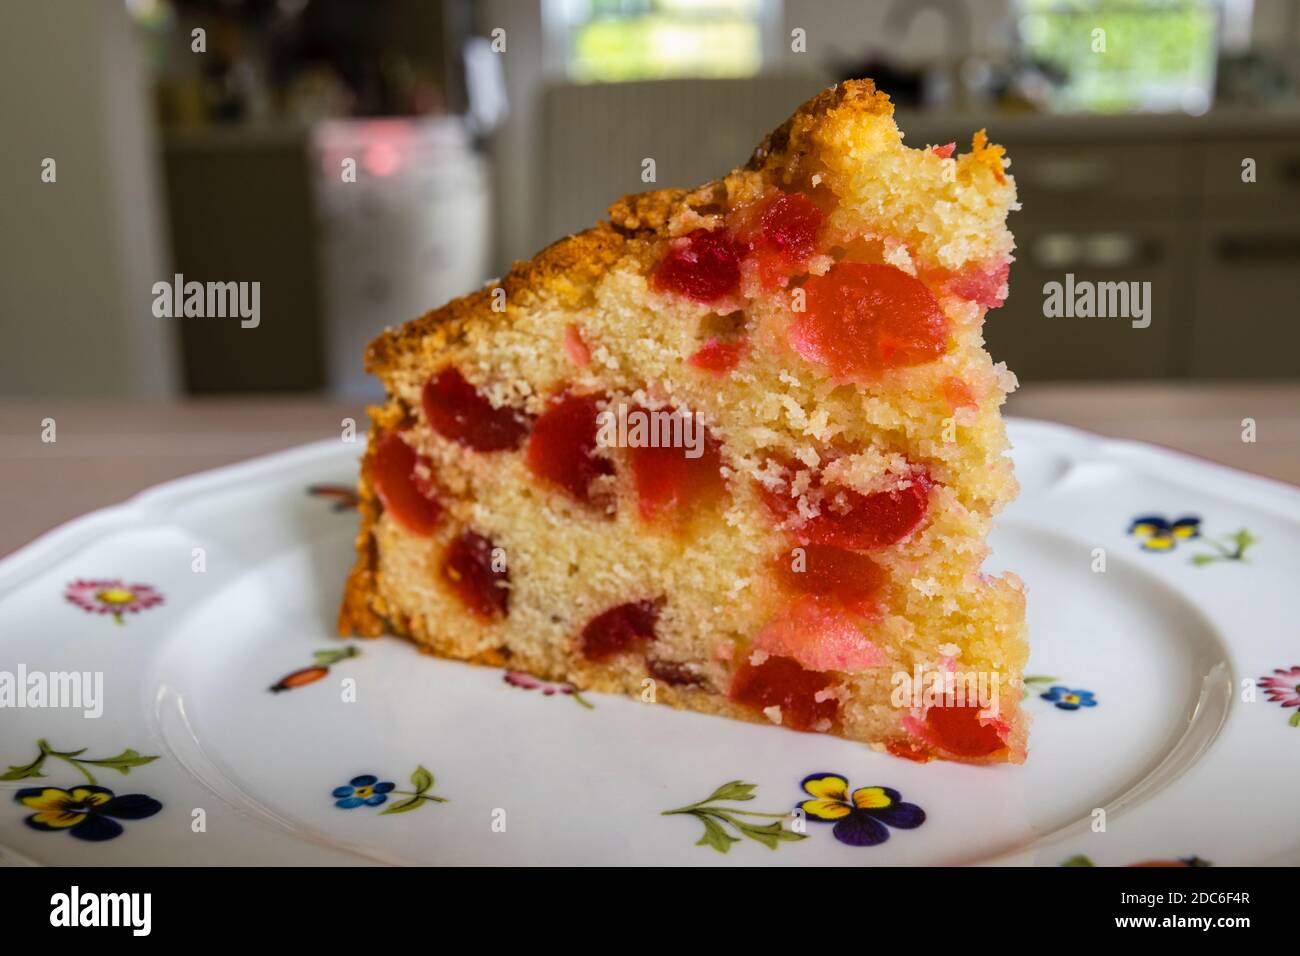 A cut slice of traditional round home-made cherry cake with red glace cherries served on a flowery white plate Stock Photo